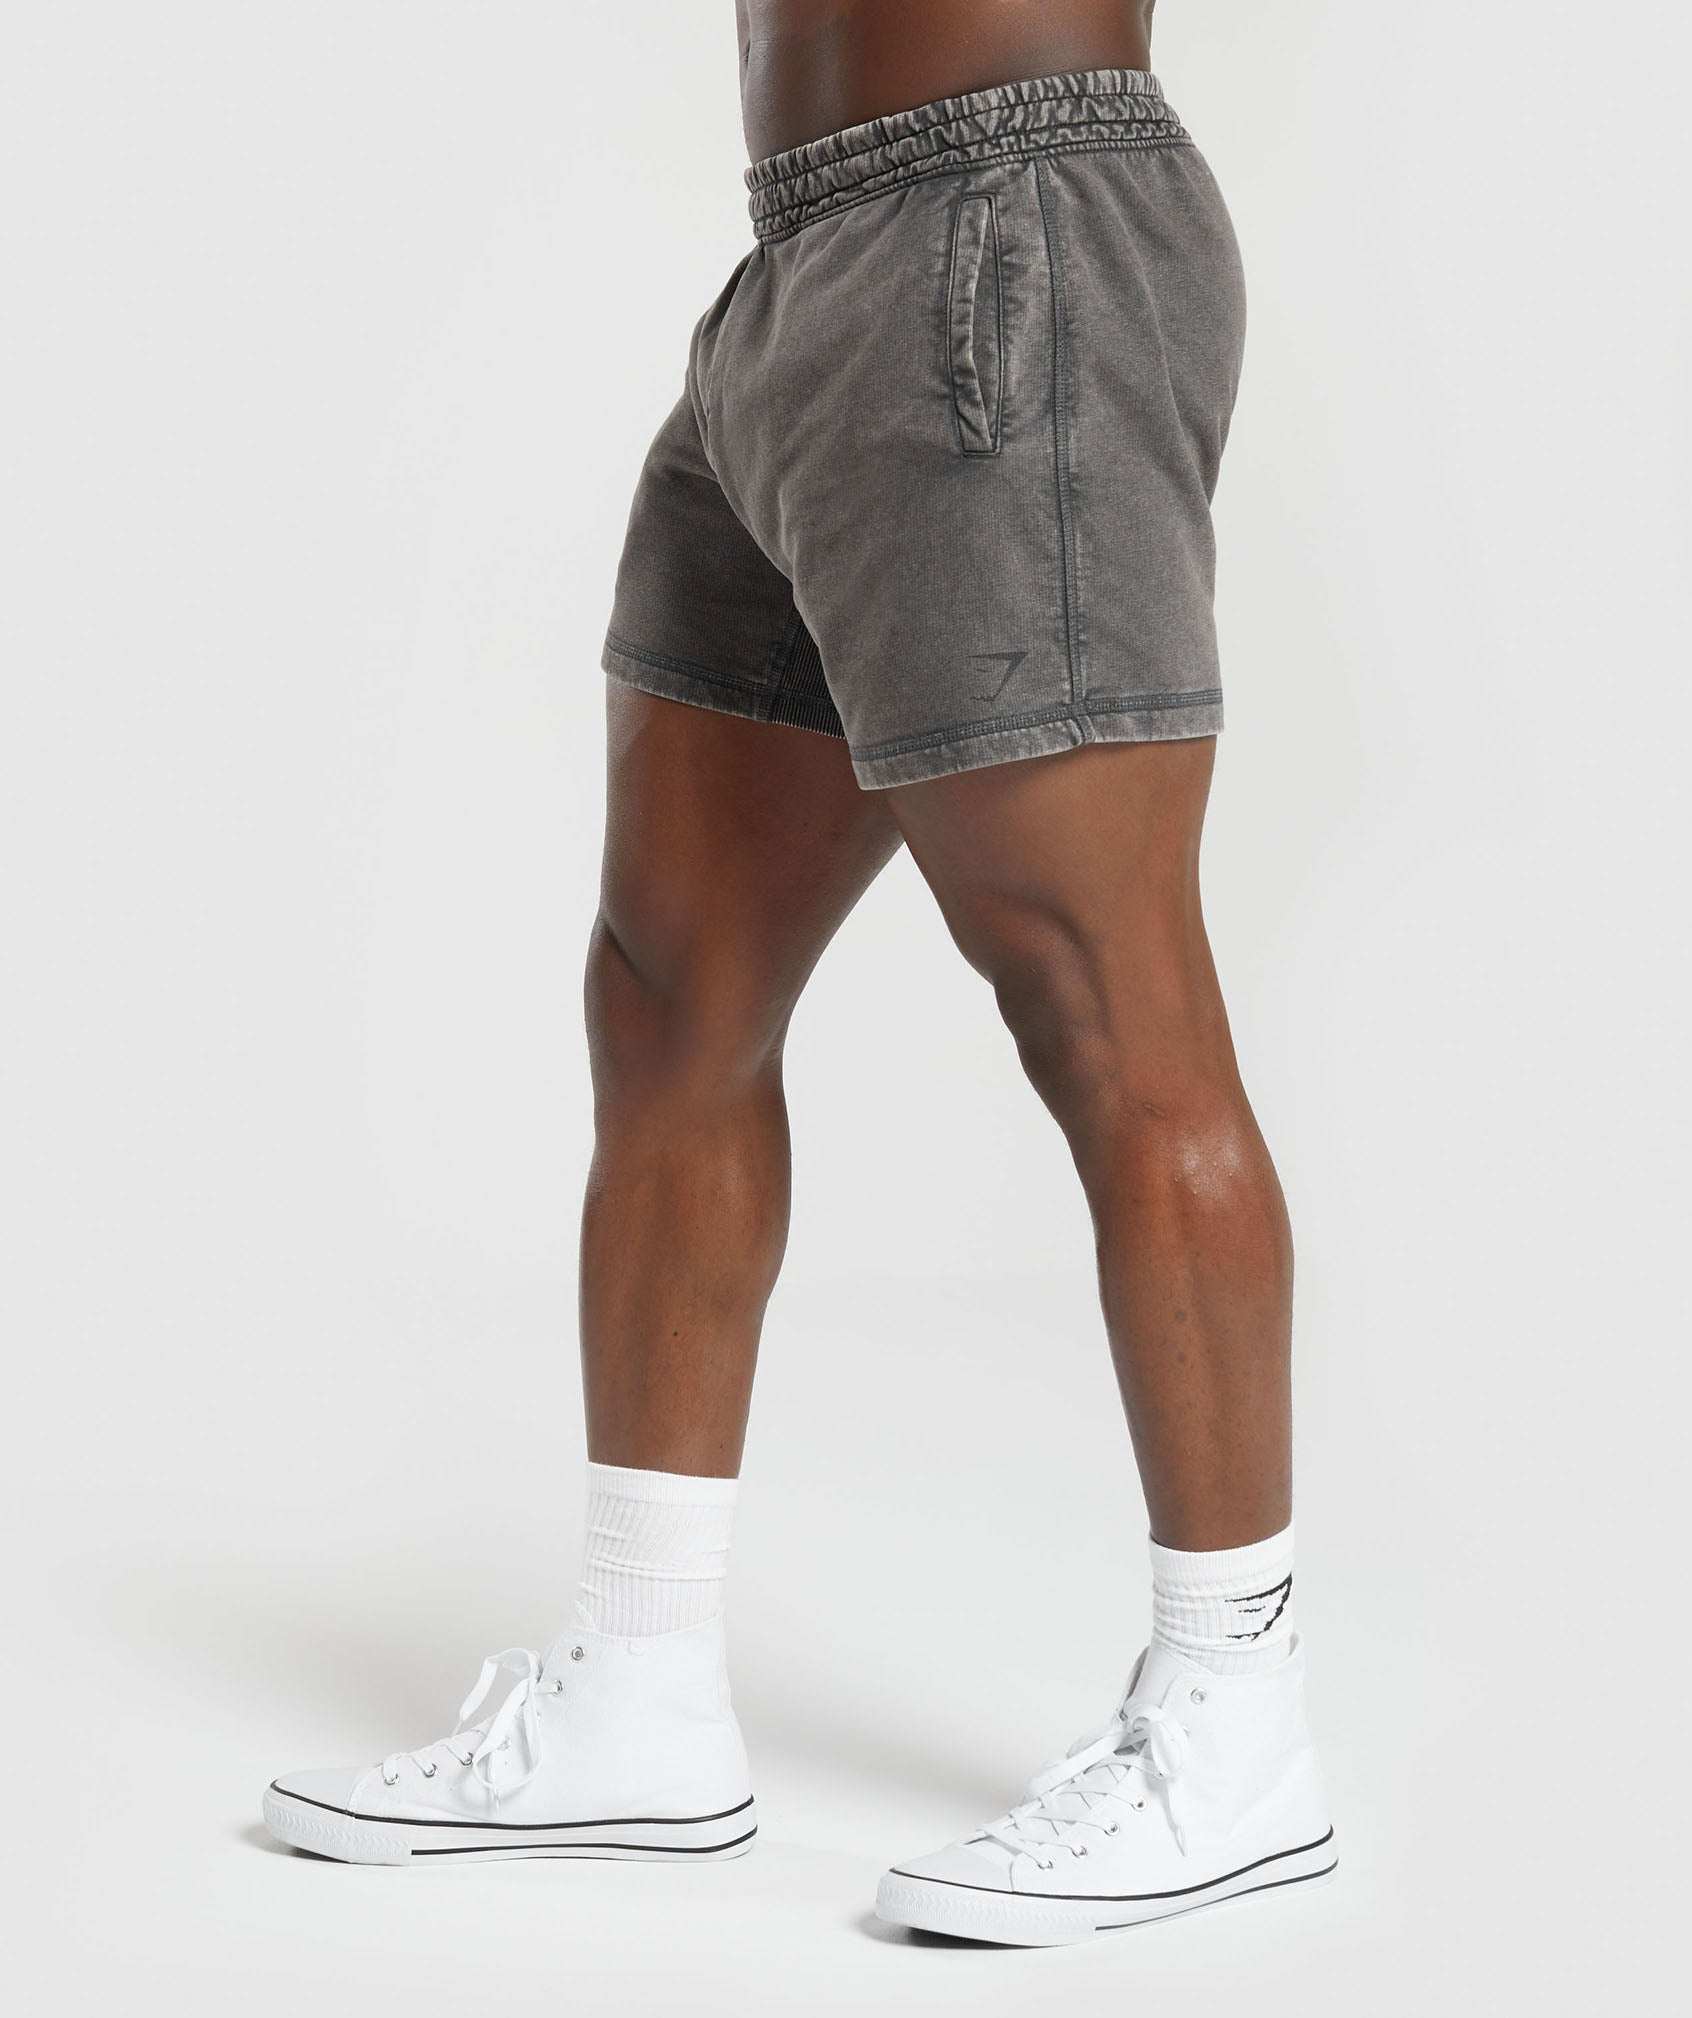 Heritage 5" Shorts in Onyx Grey - view 3